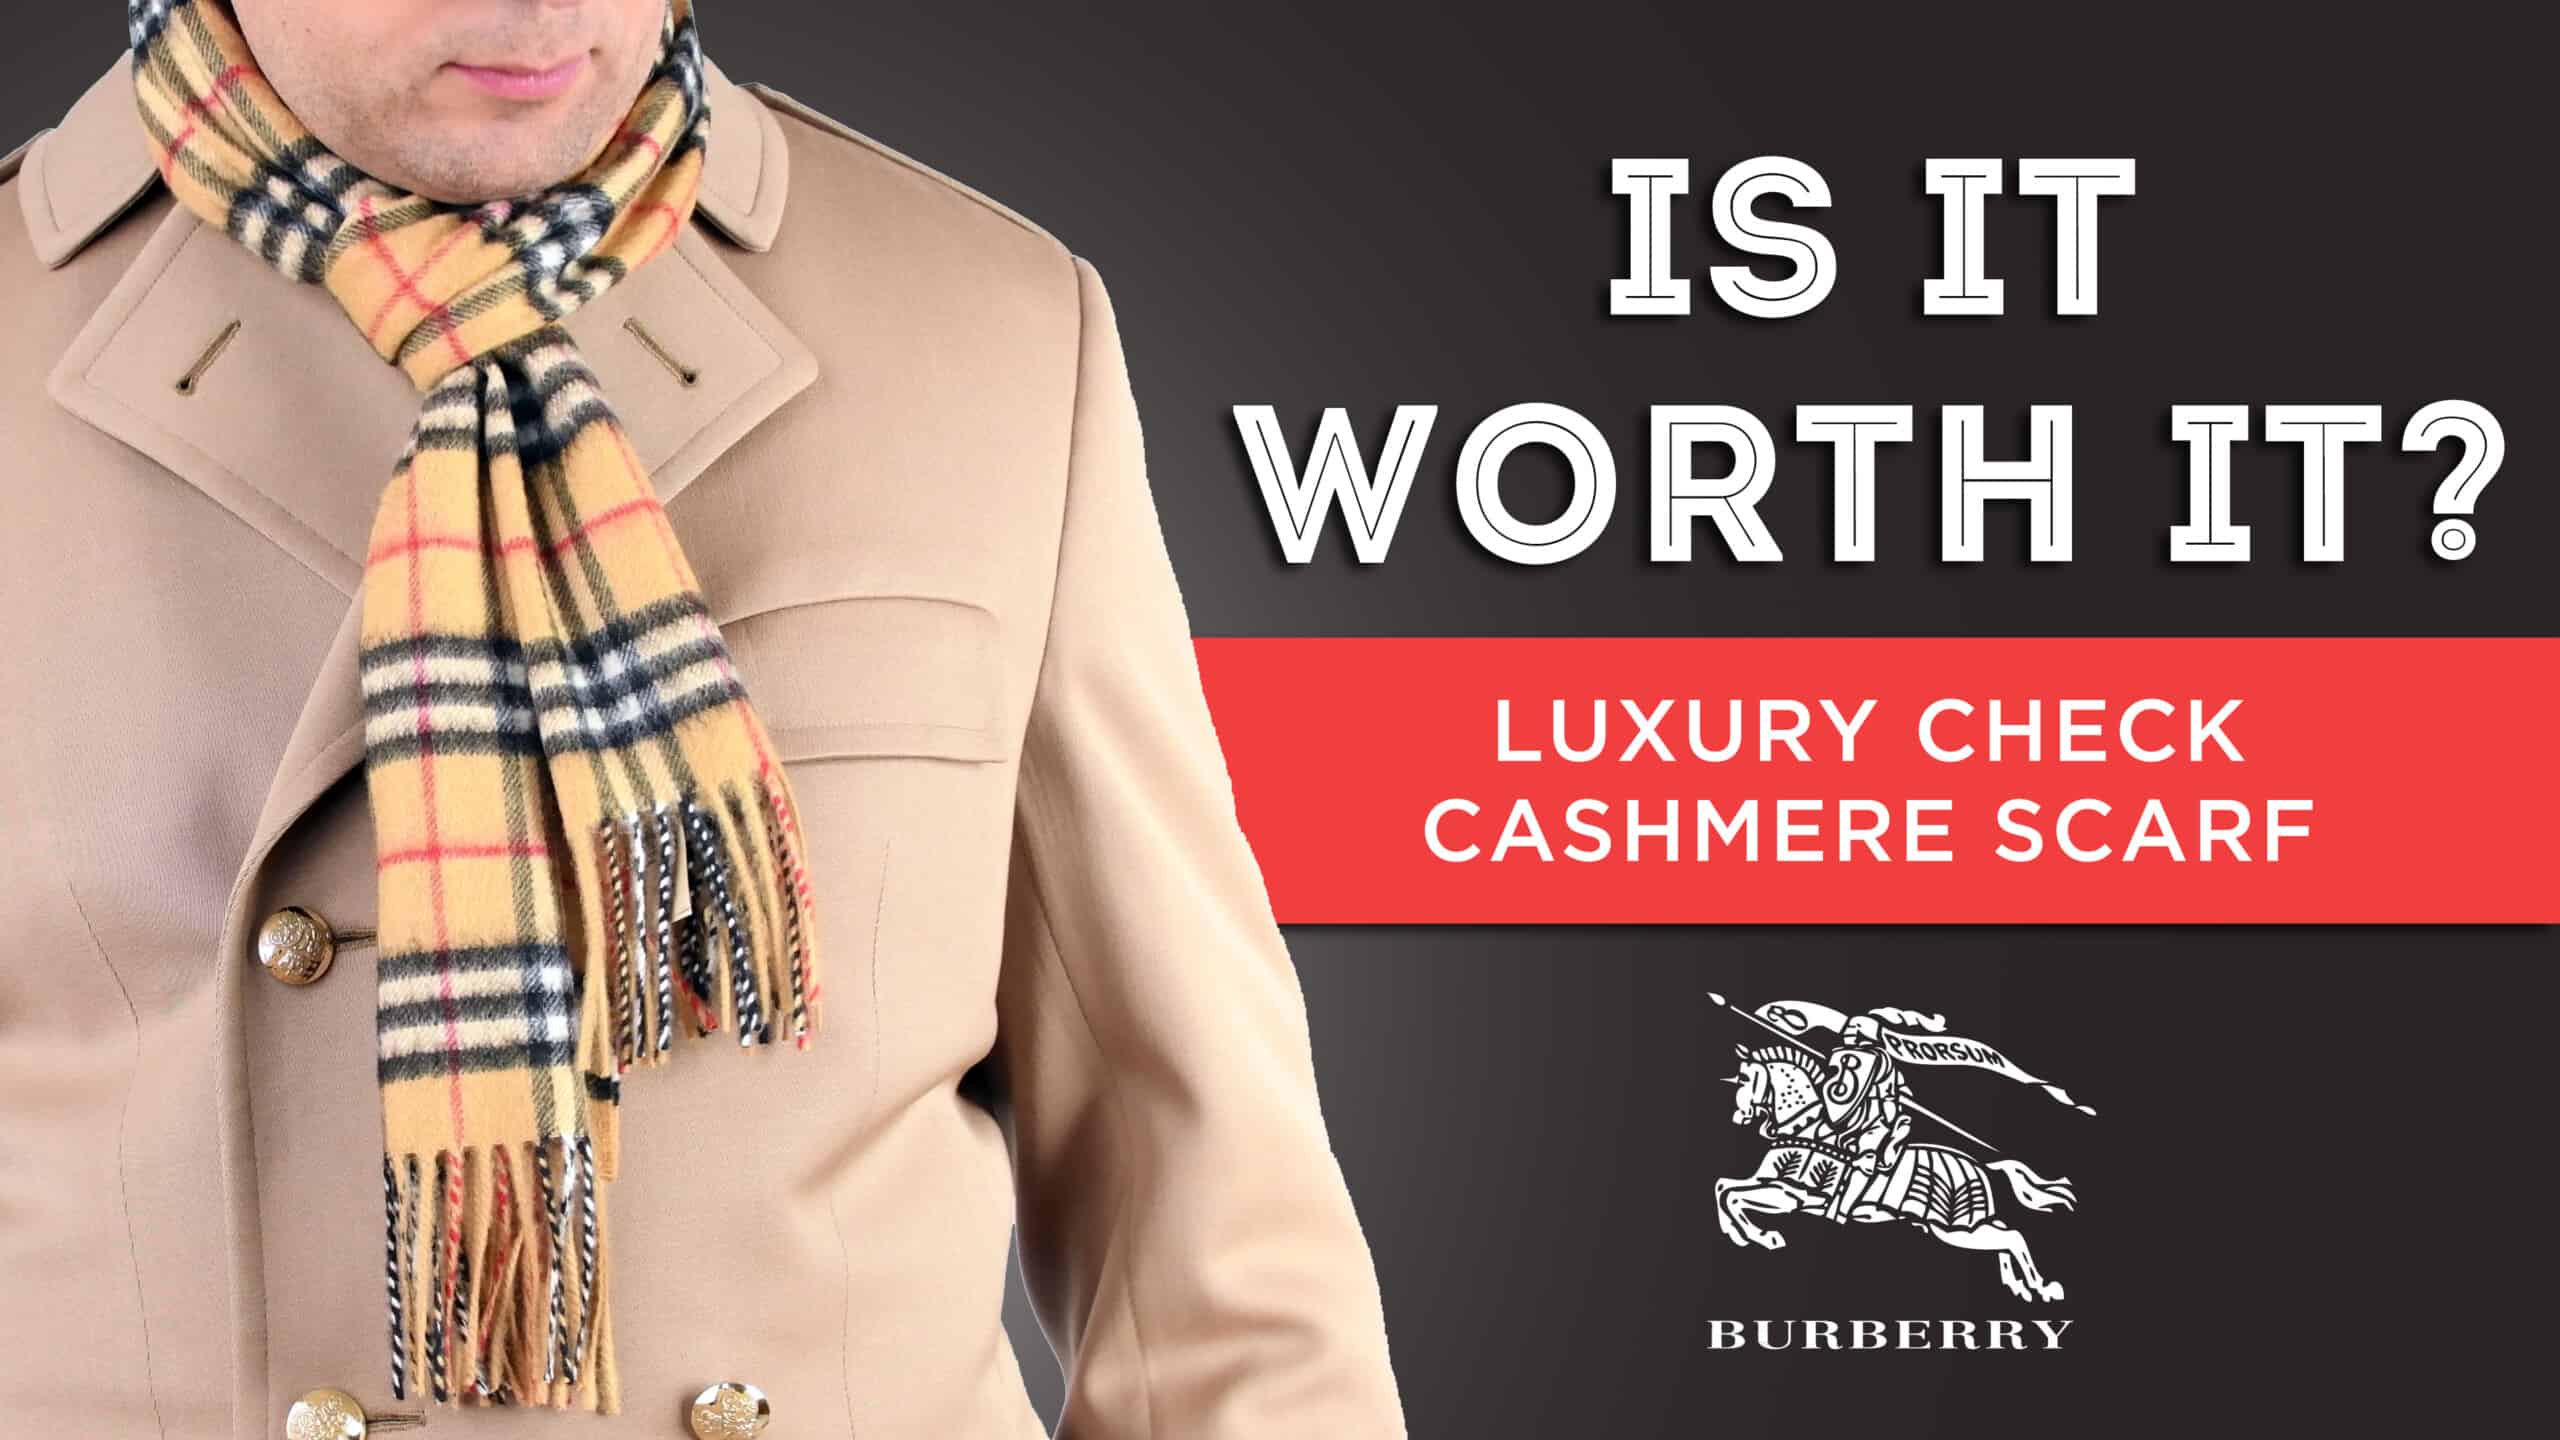 Burberry Is Worth It? - Luxury Check Cashmere Scarf Review